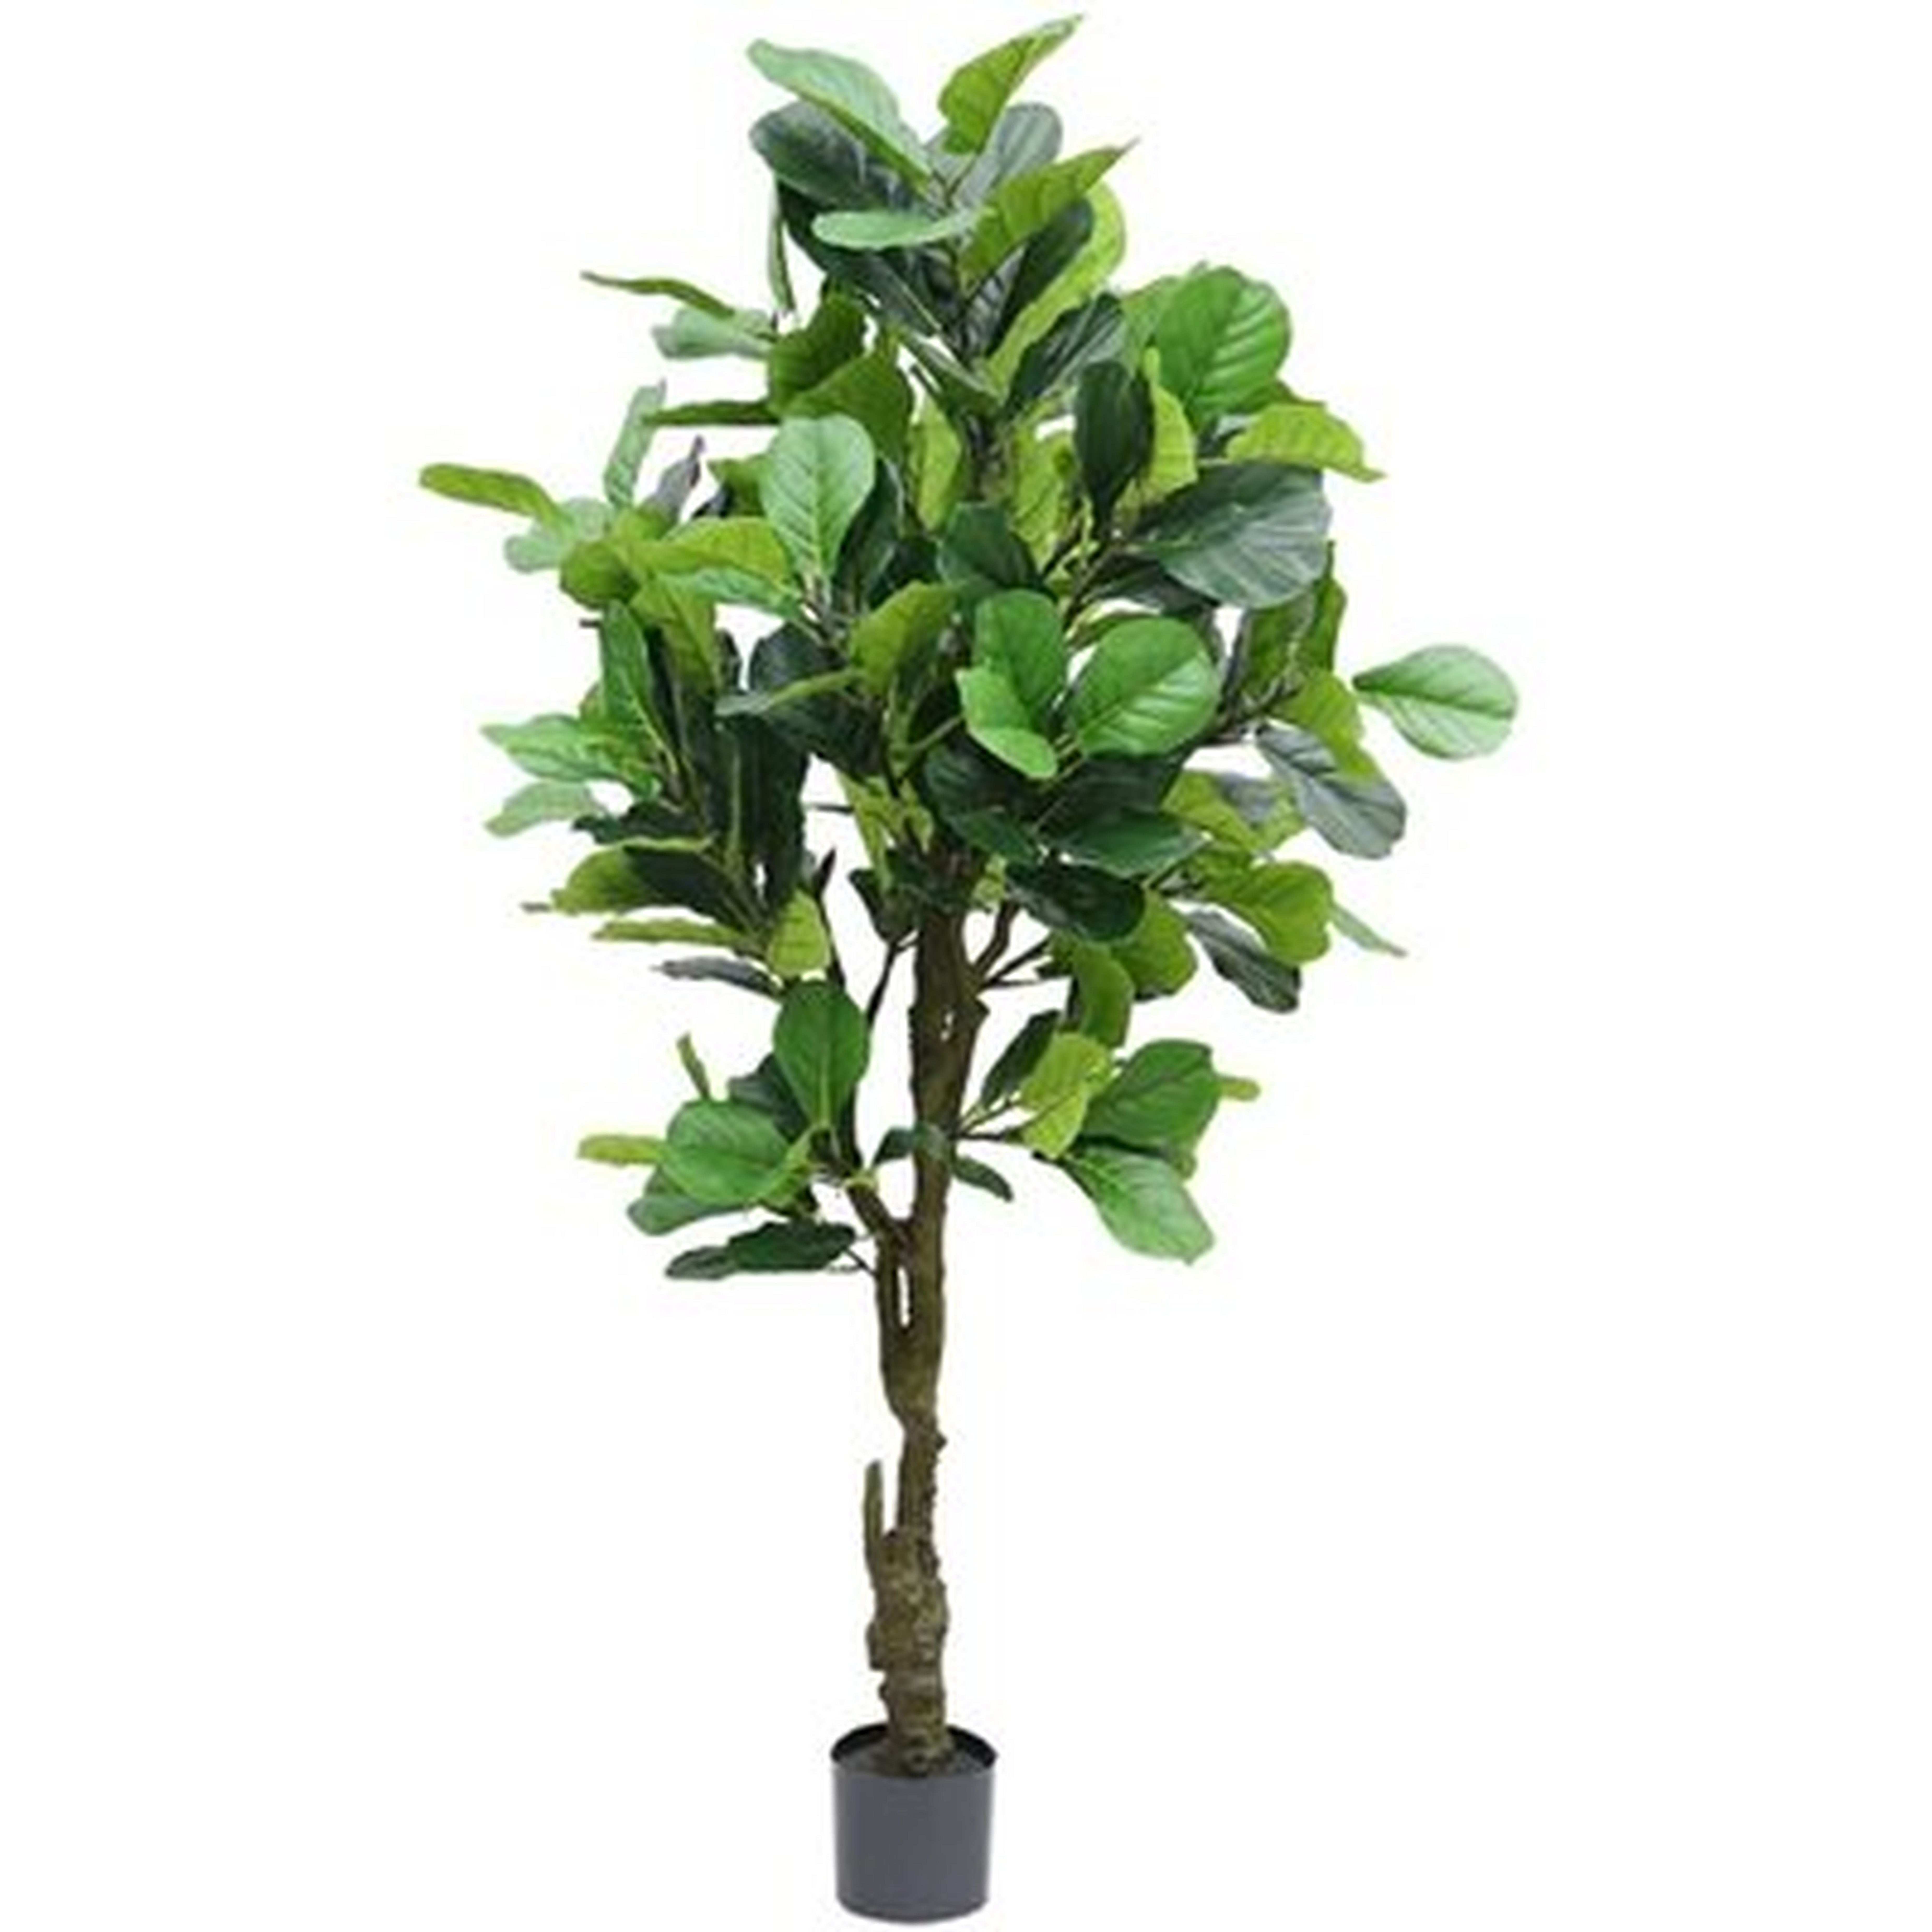 6Ft Artificial Tree Fiddle Leaf Fig Tree Fake Tree In Pot Natural Faux Tree With 150 Leaves Artificial Plant Indoor Outdoor Decor For House Home Office Perfect Housewarming Gift - Wayfair